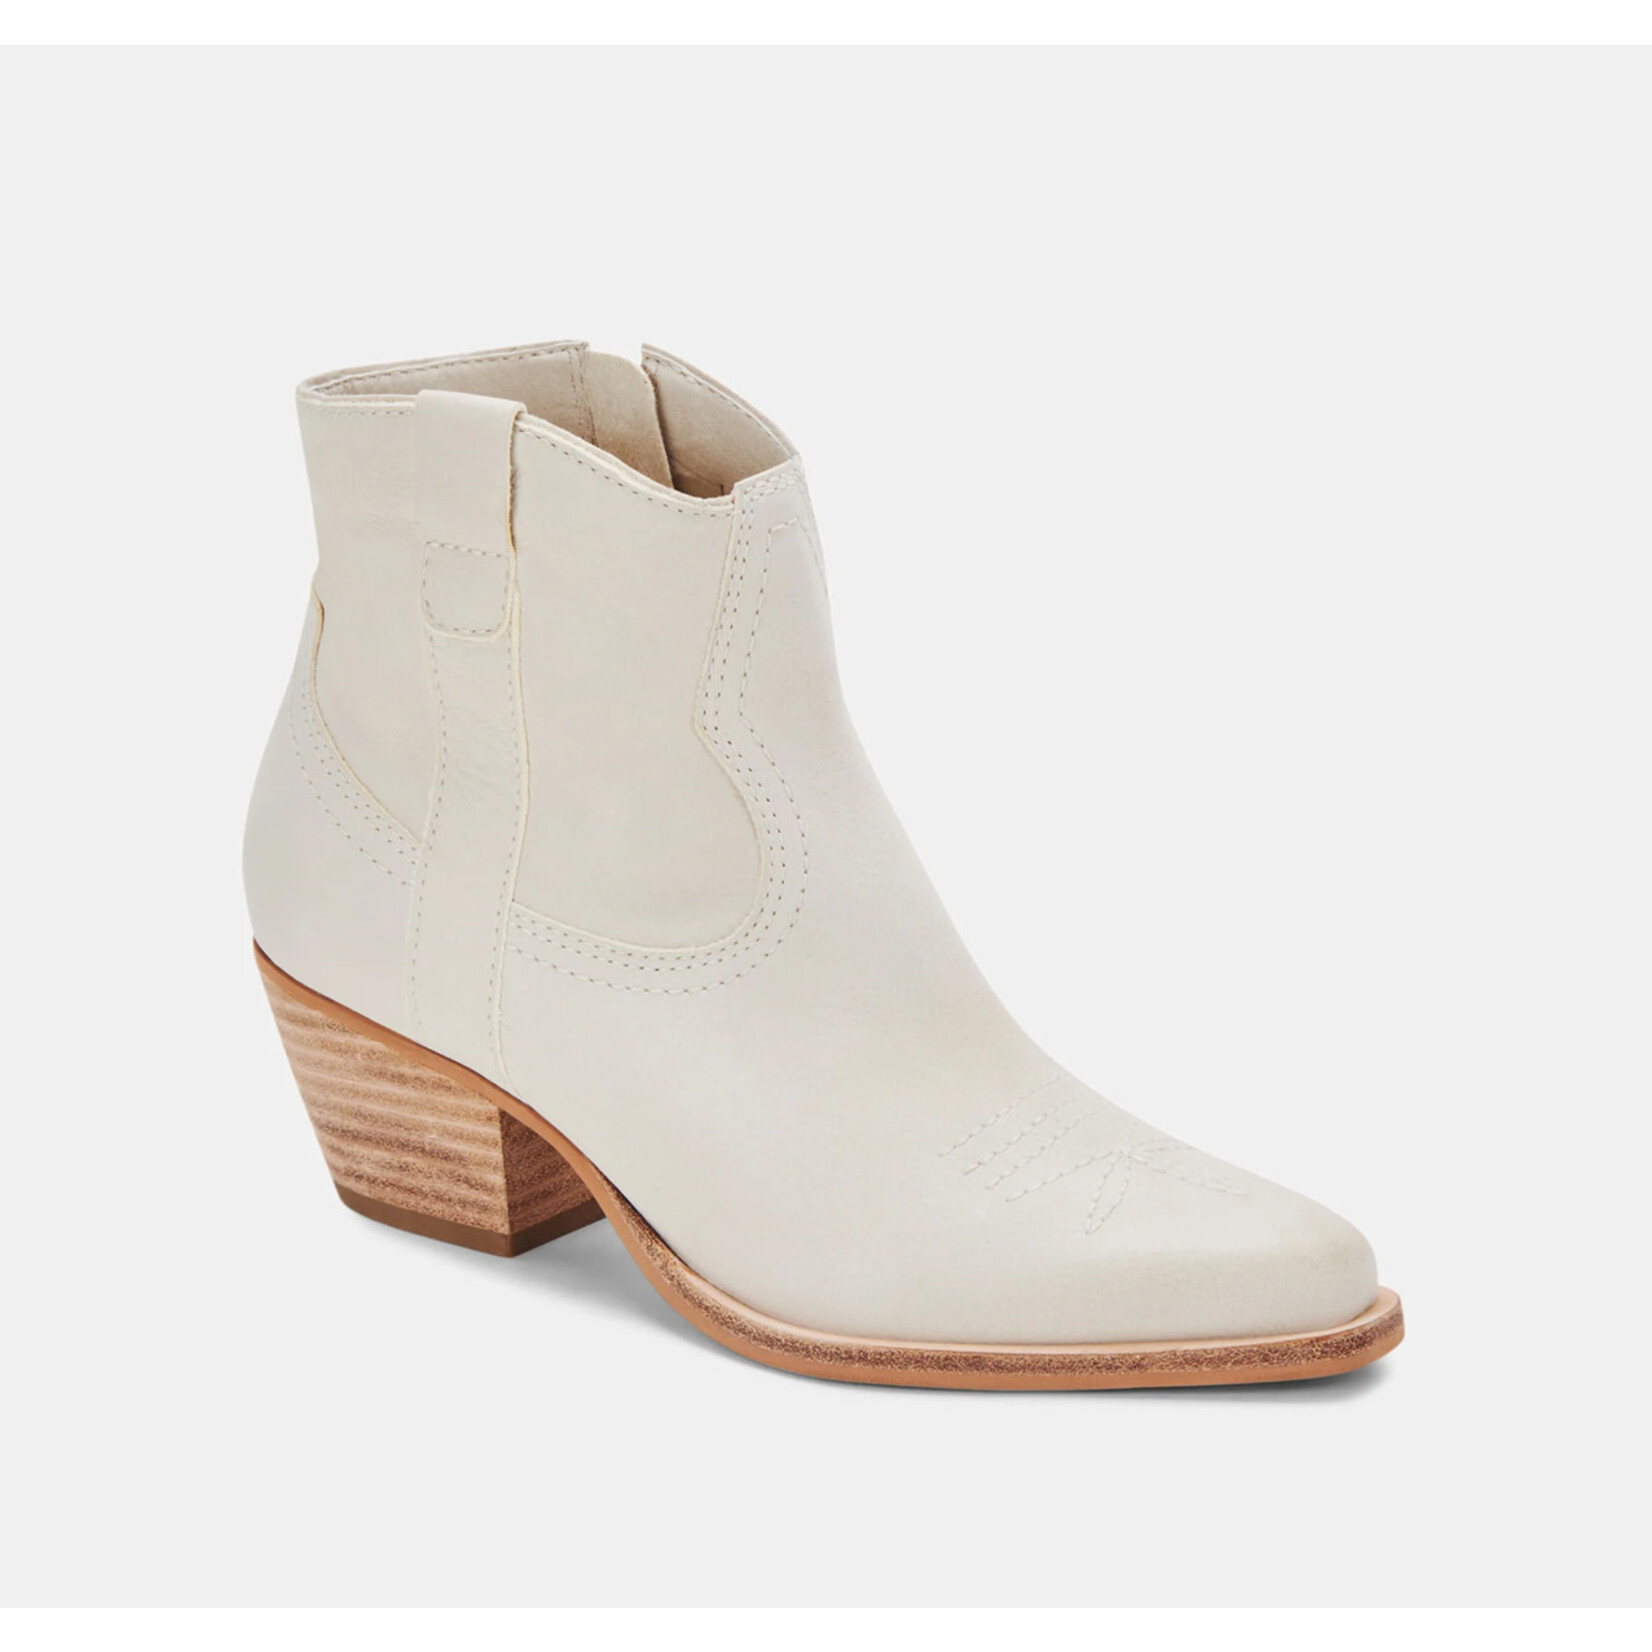 Dolce Vita Silma ankle boot